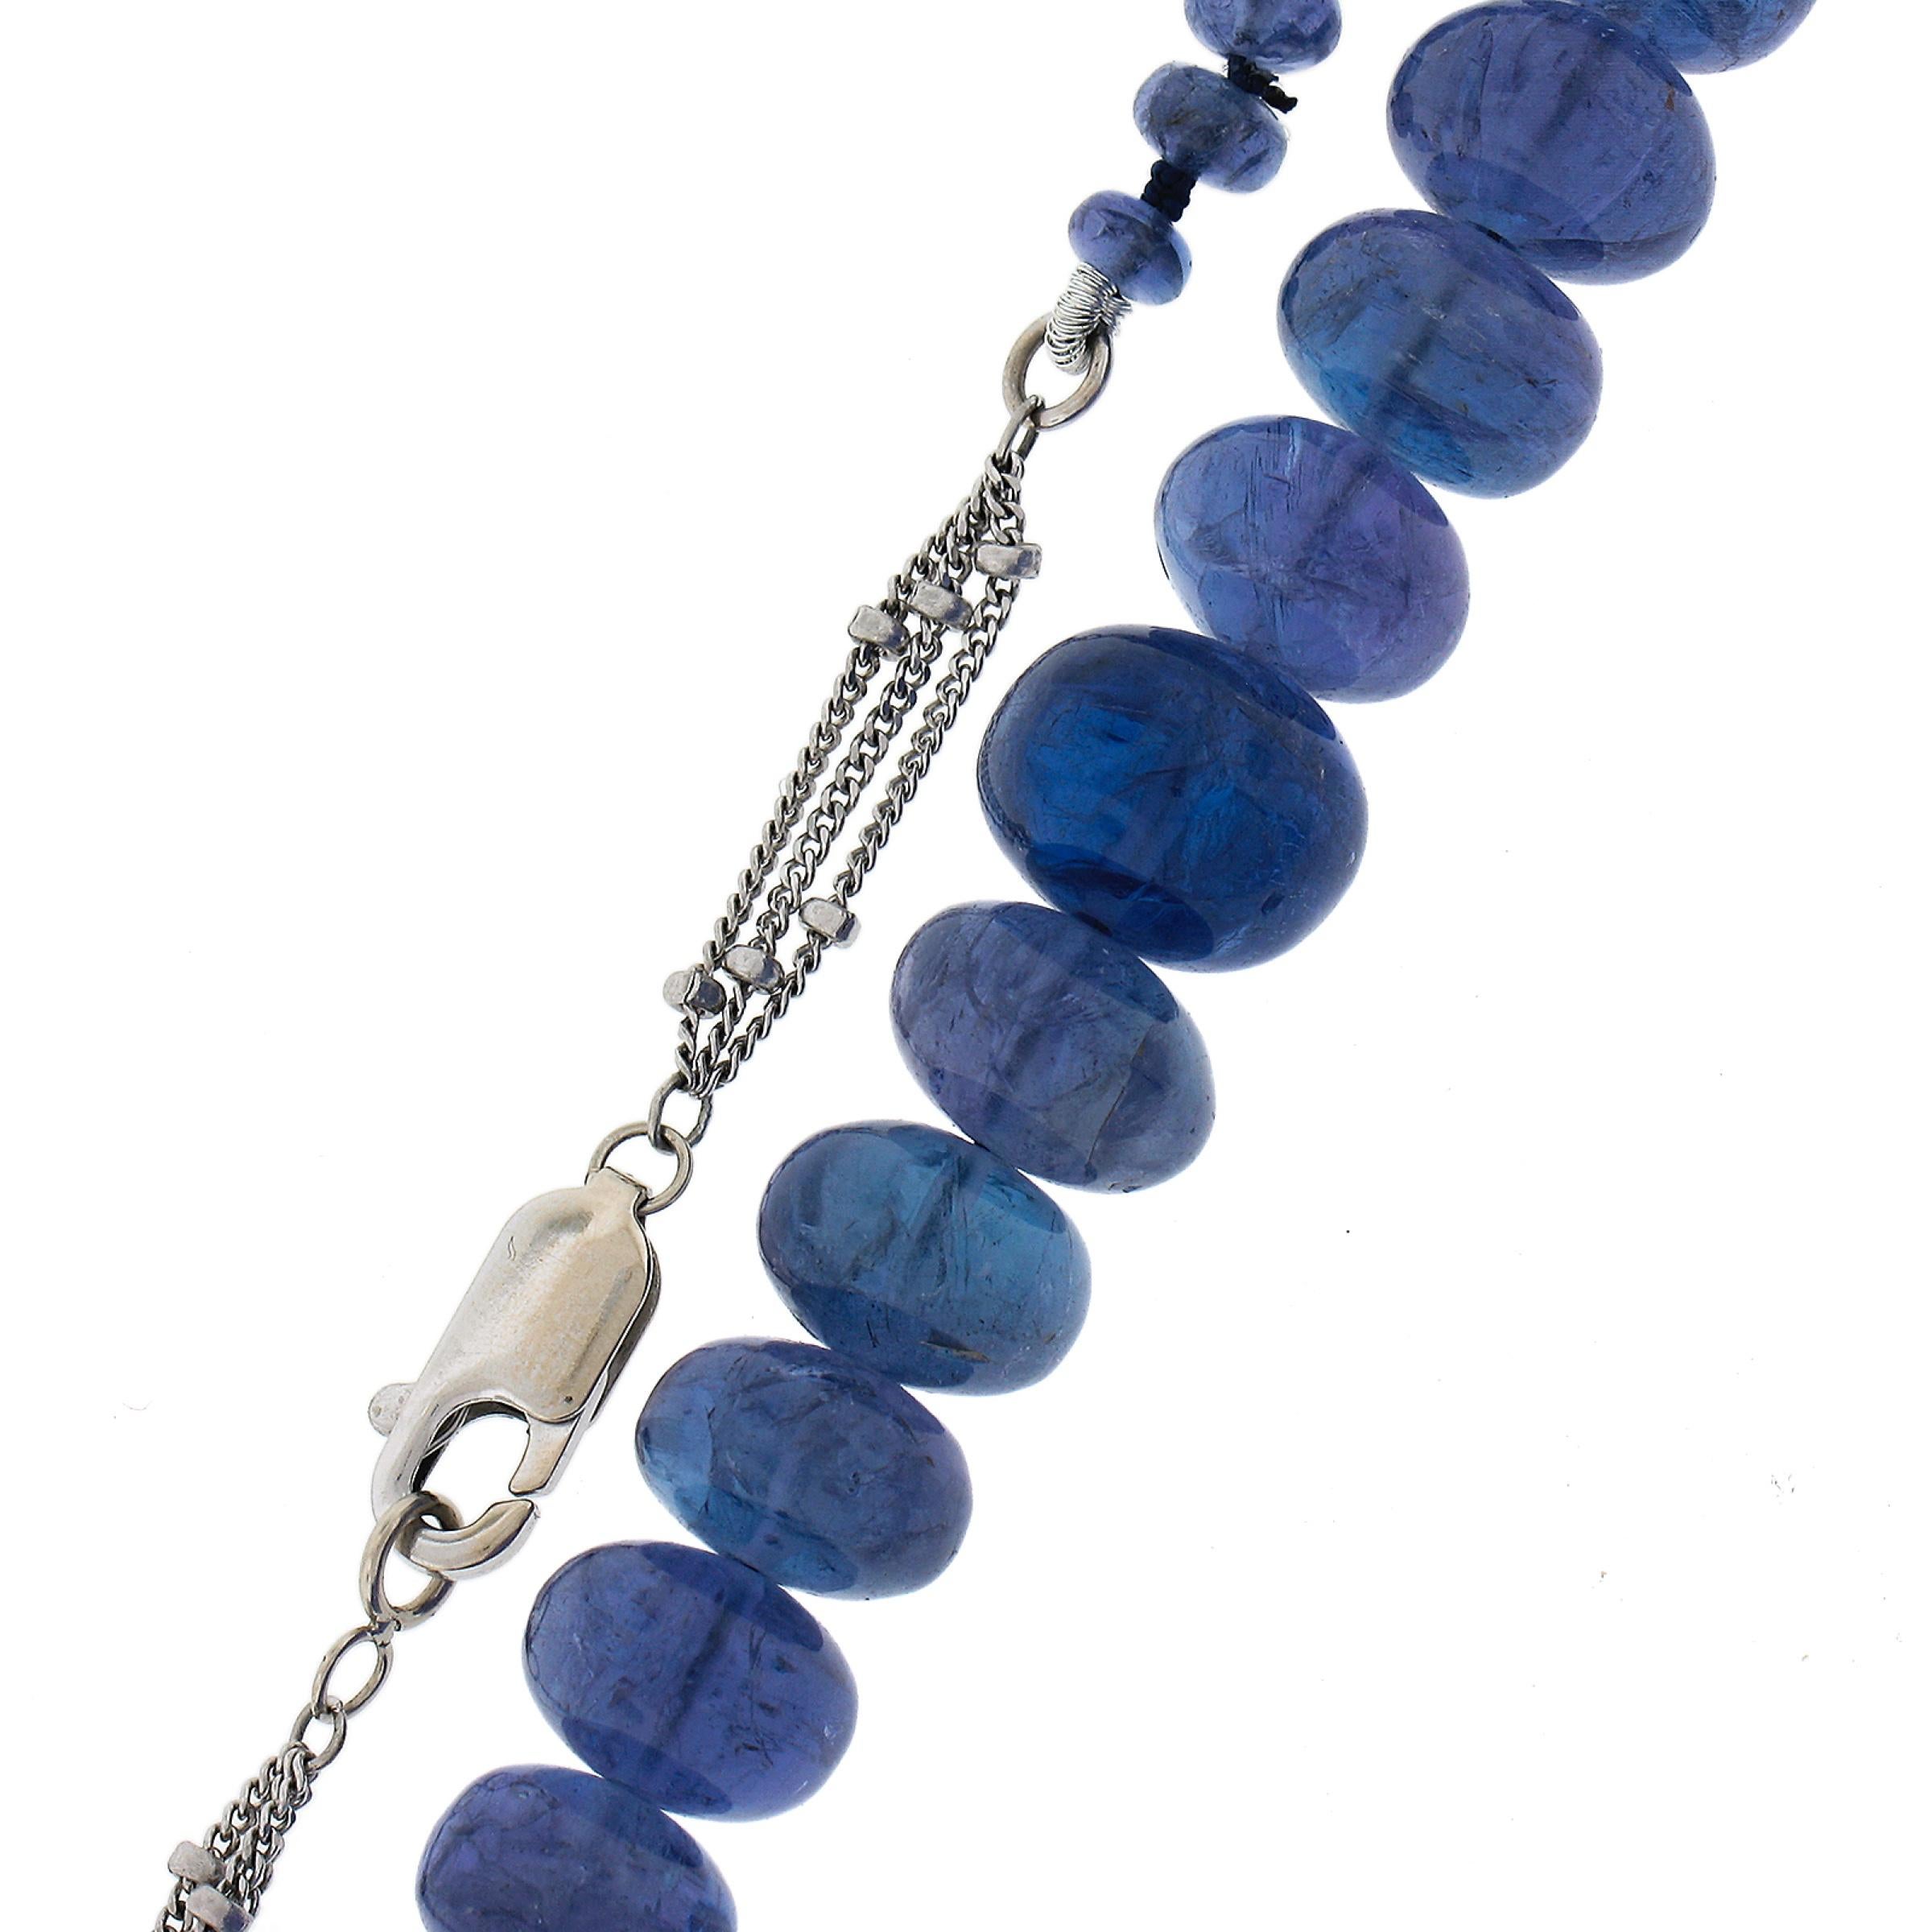 GIA Rondelle Beads Tanzanite Graduated Strand Necklace w/ 14k Gold Chain & Clasp For Sale 1